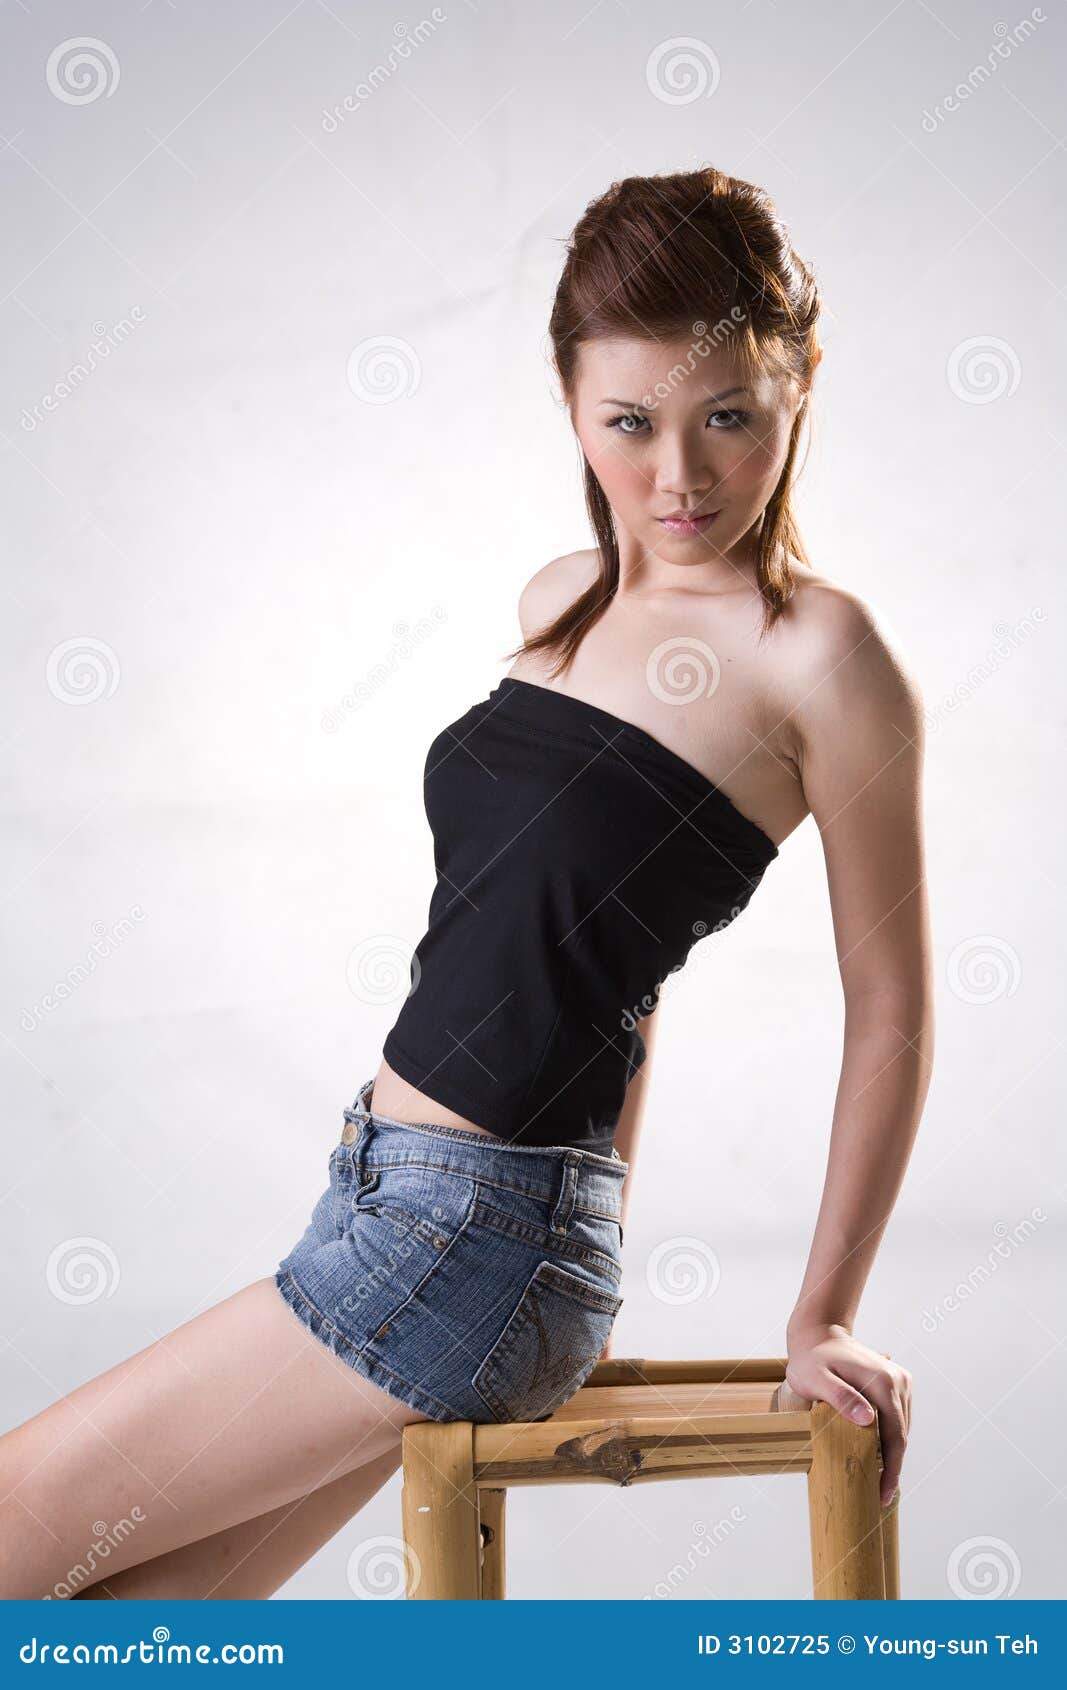 Girl In Jeans 2 Stock Image Image Of Eyesight Cute